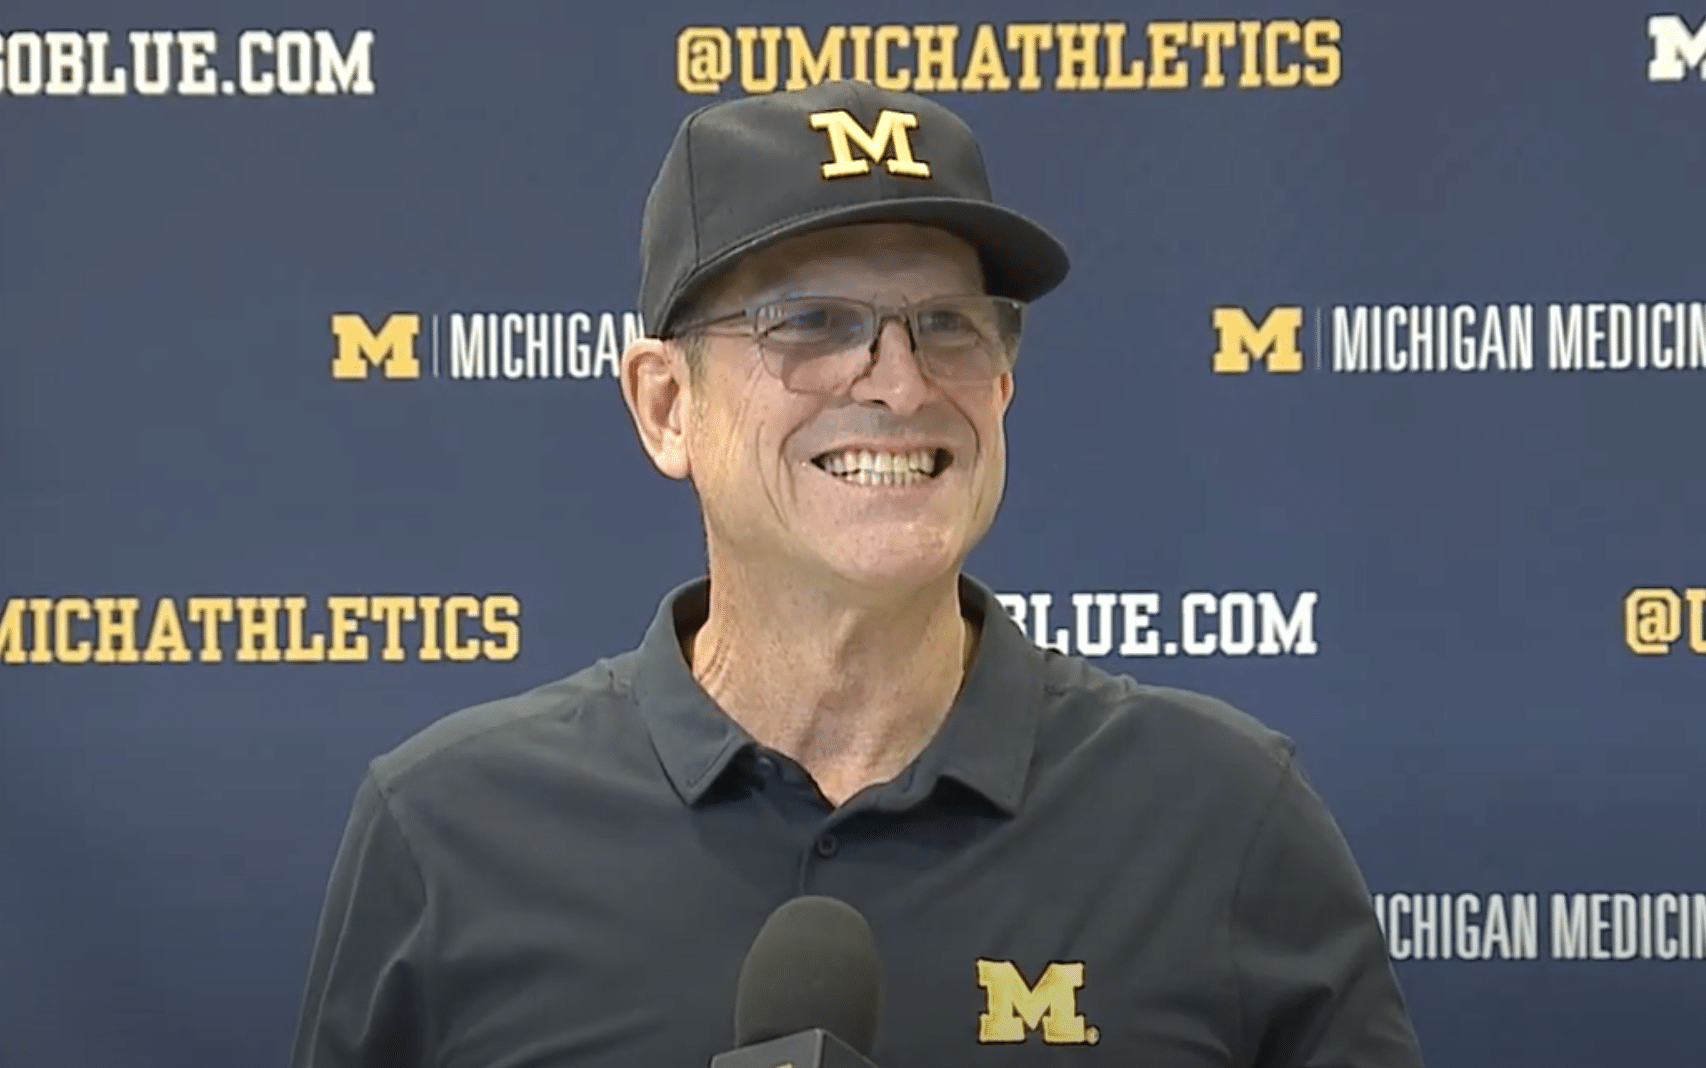 Jim Harbaugh explains why Michigan Football Jim Harbaugh compares Michigan locker room Jim Harbaugh praises Sherrone Moore Will Jim Harbaugh receive his bonuses for 2023 Los Angeles Chargers interested in hiring Jim Harbaugh Jim Harbaugh Talks About J.J. McCarthy's Growth at Michigan Jim Harbaugh Has Perfect Answer to Question About His Future Will He Stay or Go? New Developments in Jim Harbaugh's Career with Michigan Revealed Jim Harbaugh interviews with Atlanta Falcons